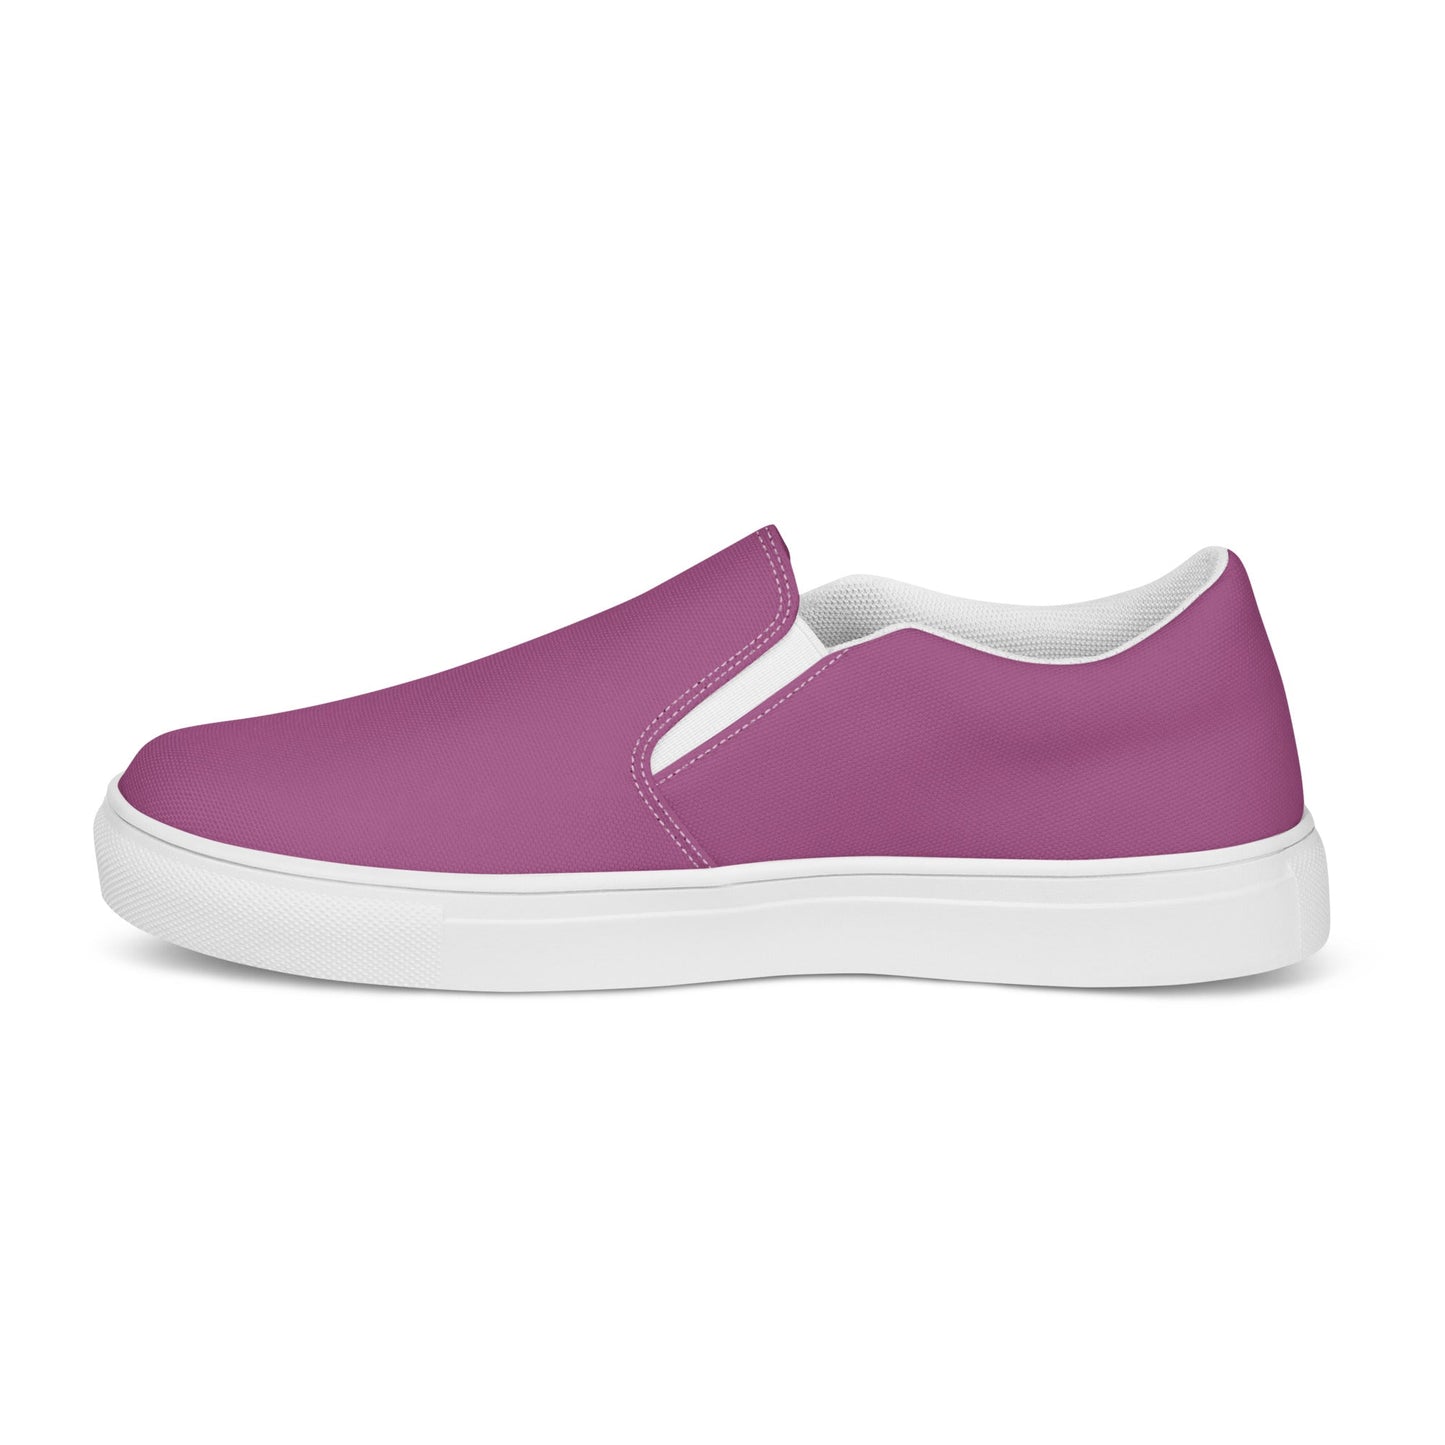 klasneakers Men’s slip-on canvas shoes - Candy Wrapper Pink